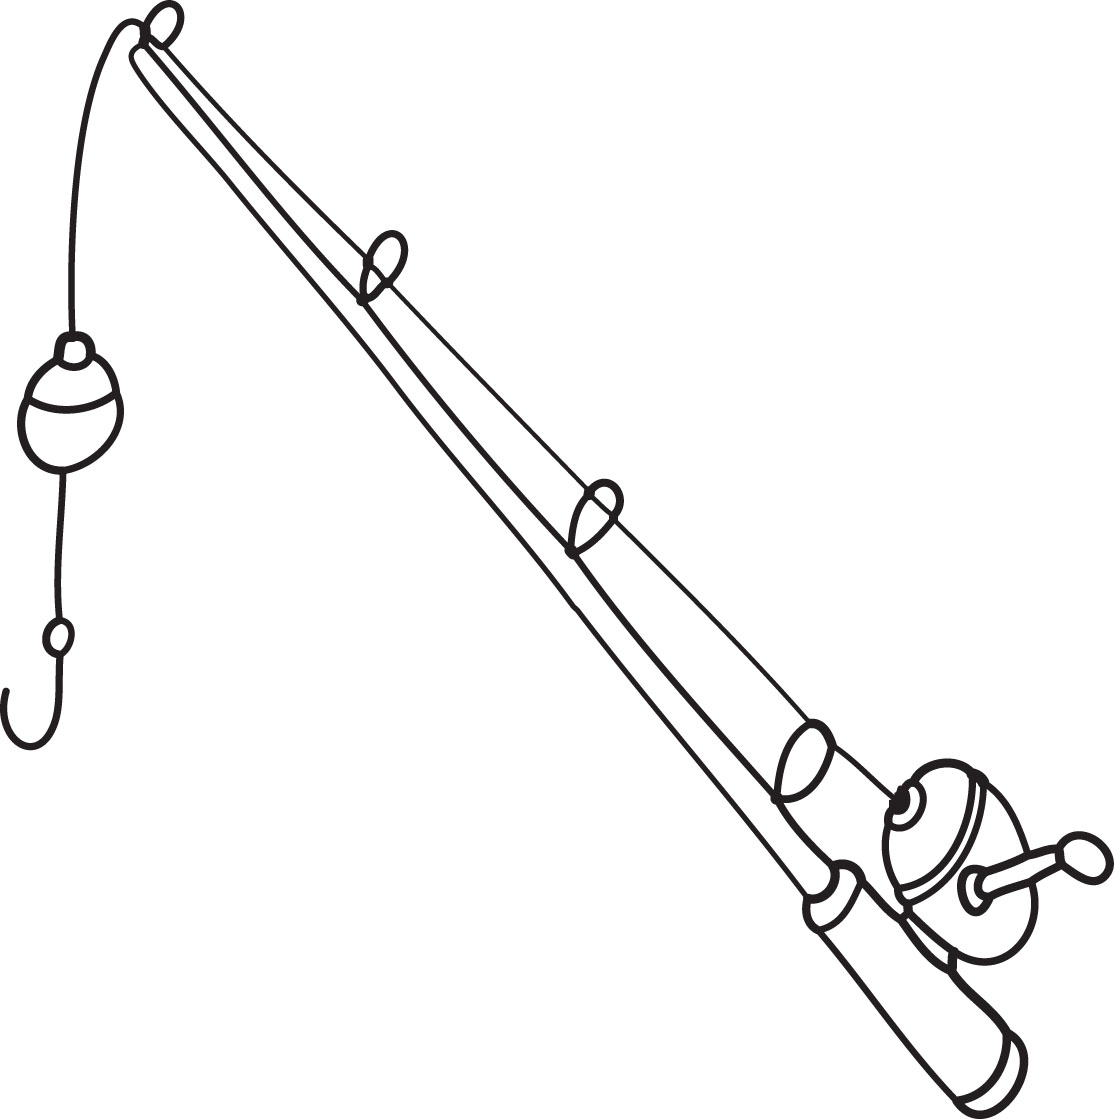 ... Fishing pole with hook an